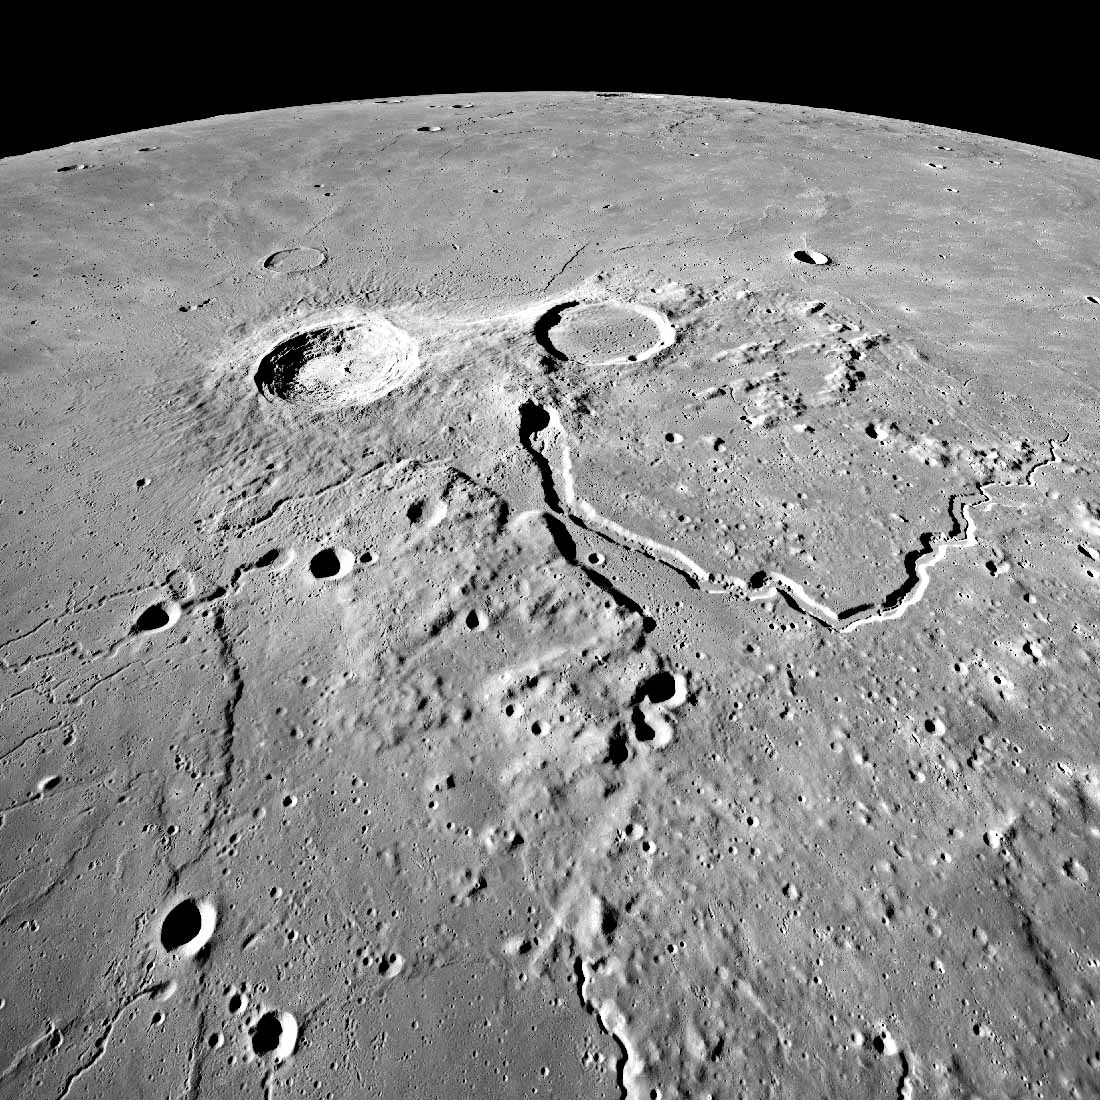 The team hopes to qualify MAPrad for space use so it can help uncover the resources available on the Moon (pictured) and Mars to support life. Credit: NASA.